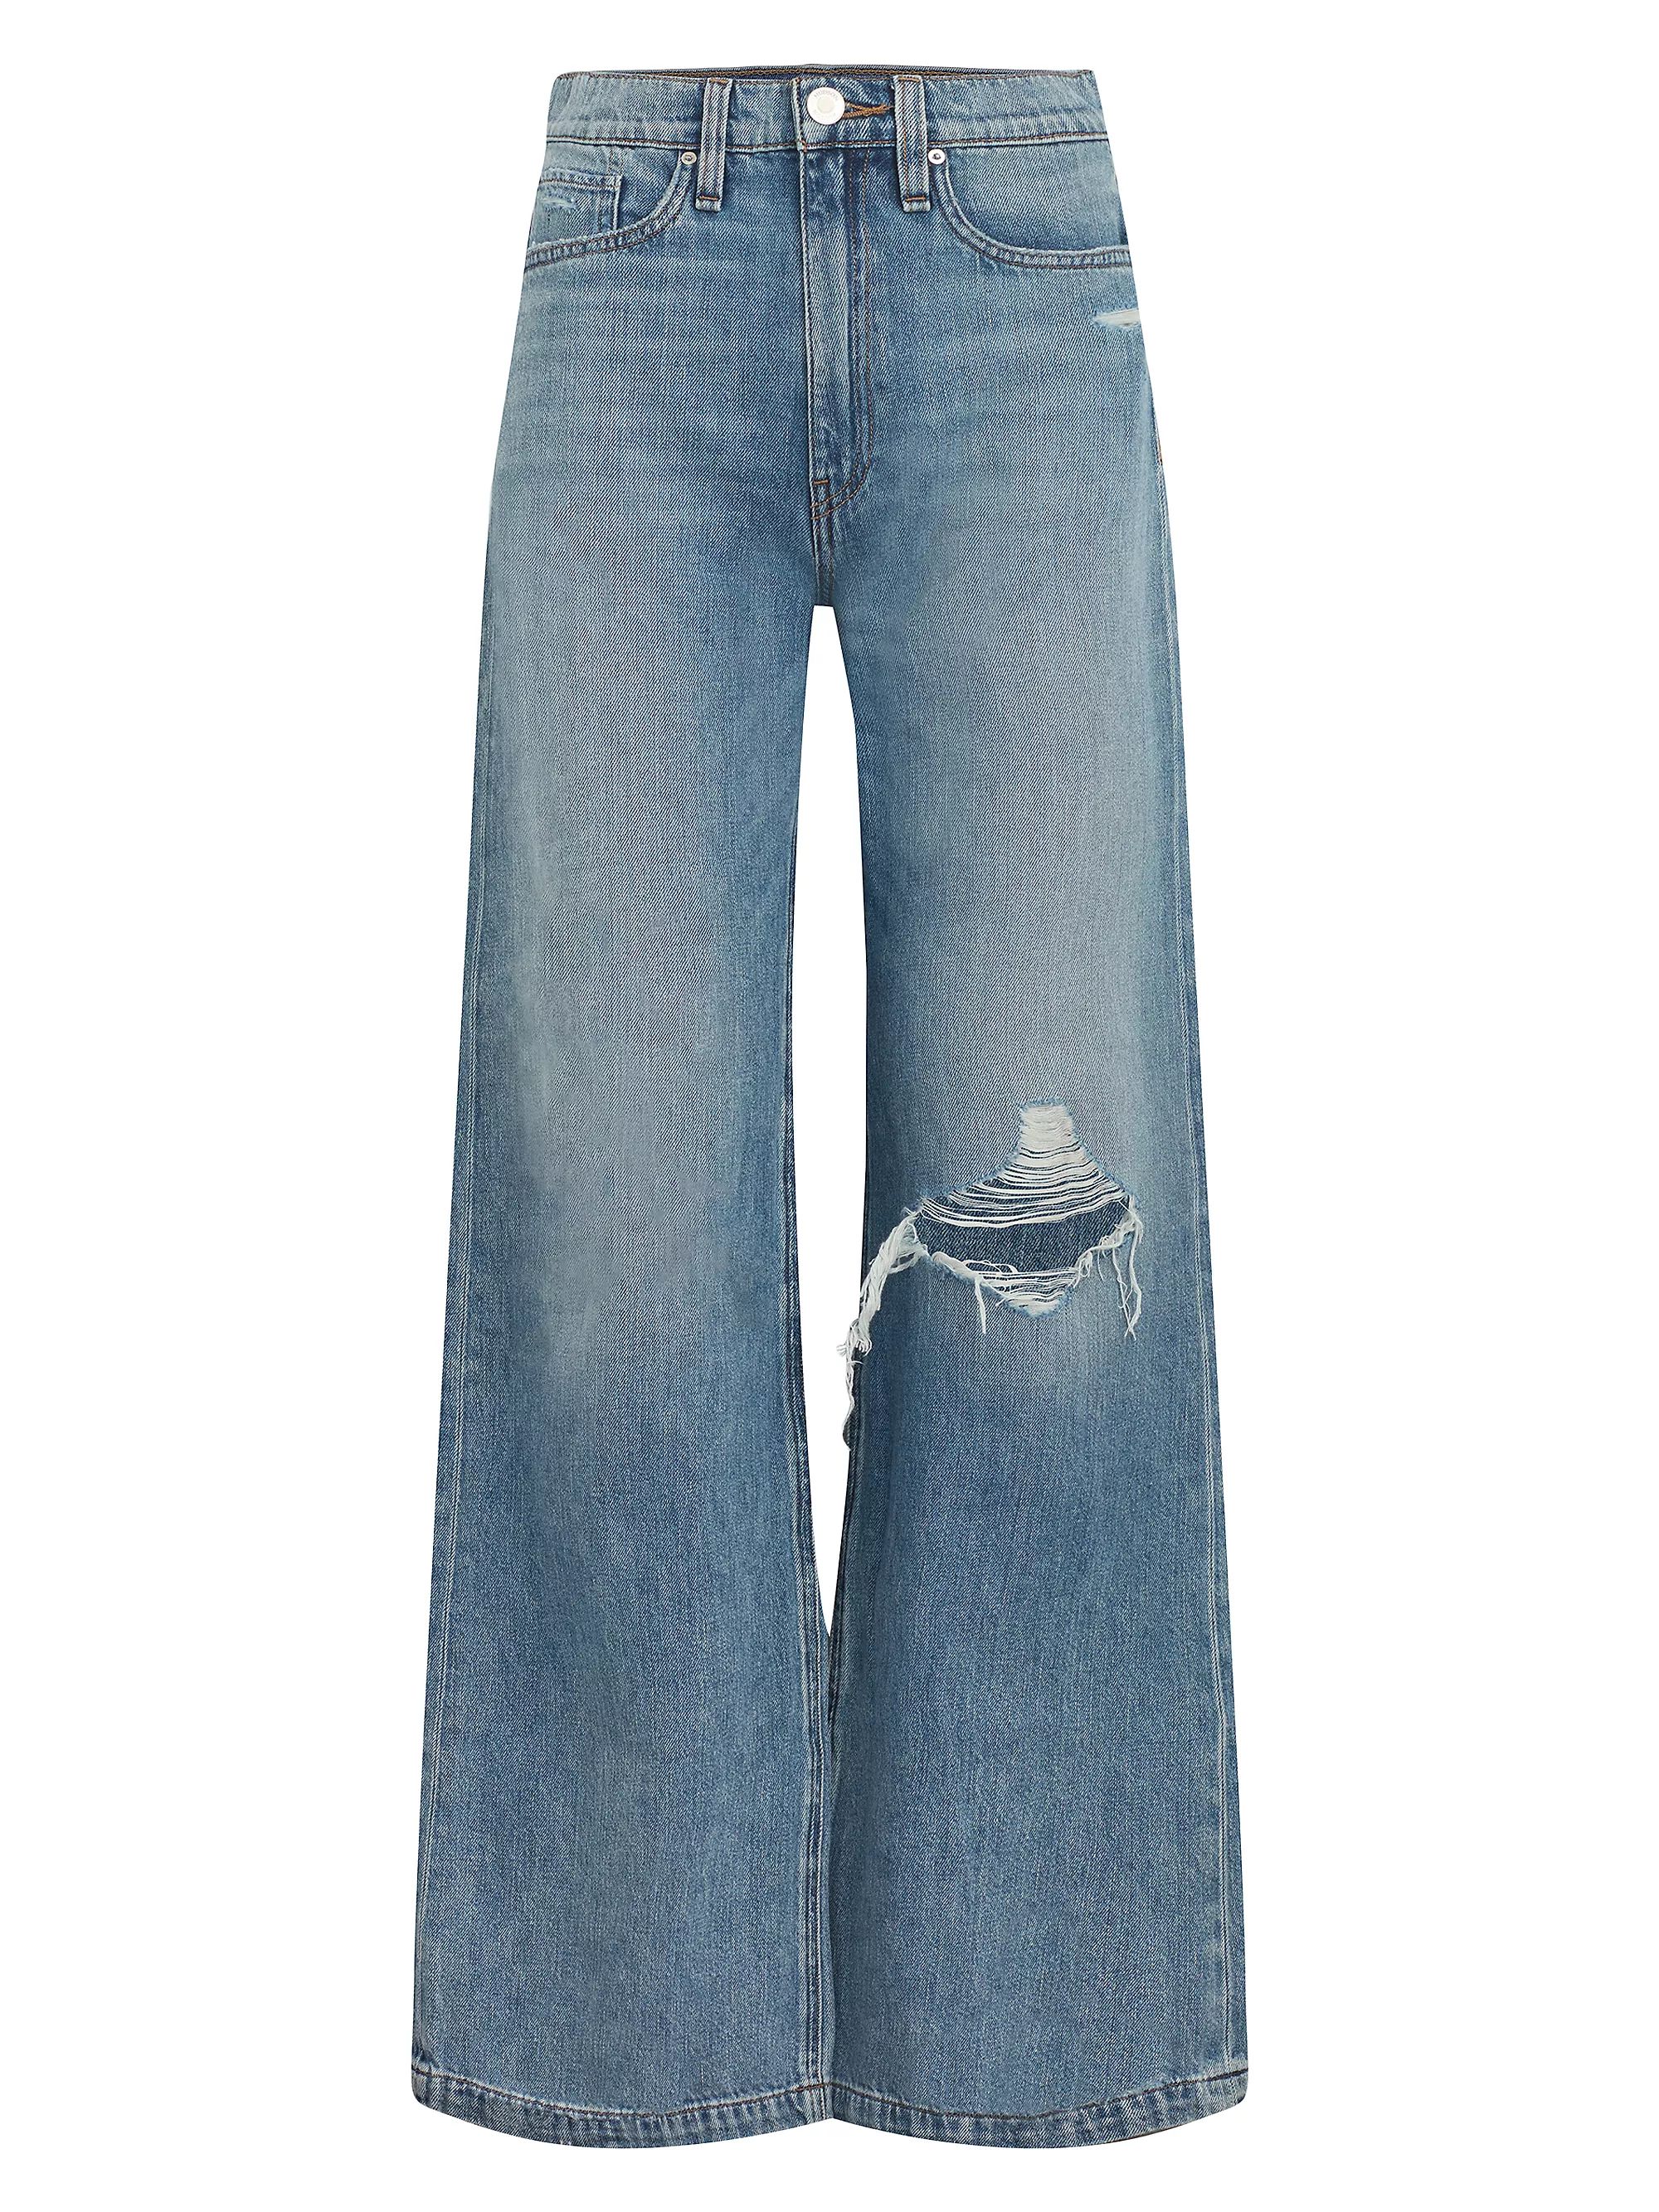 Thunder DestructedAll Flare LegHudson JeansJodie Distressed Wide-Leg Jeans$225
            
     ... | Saks Fifth Avenue